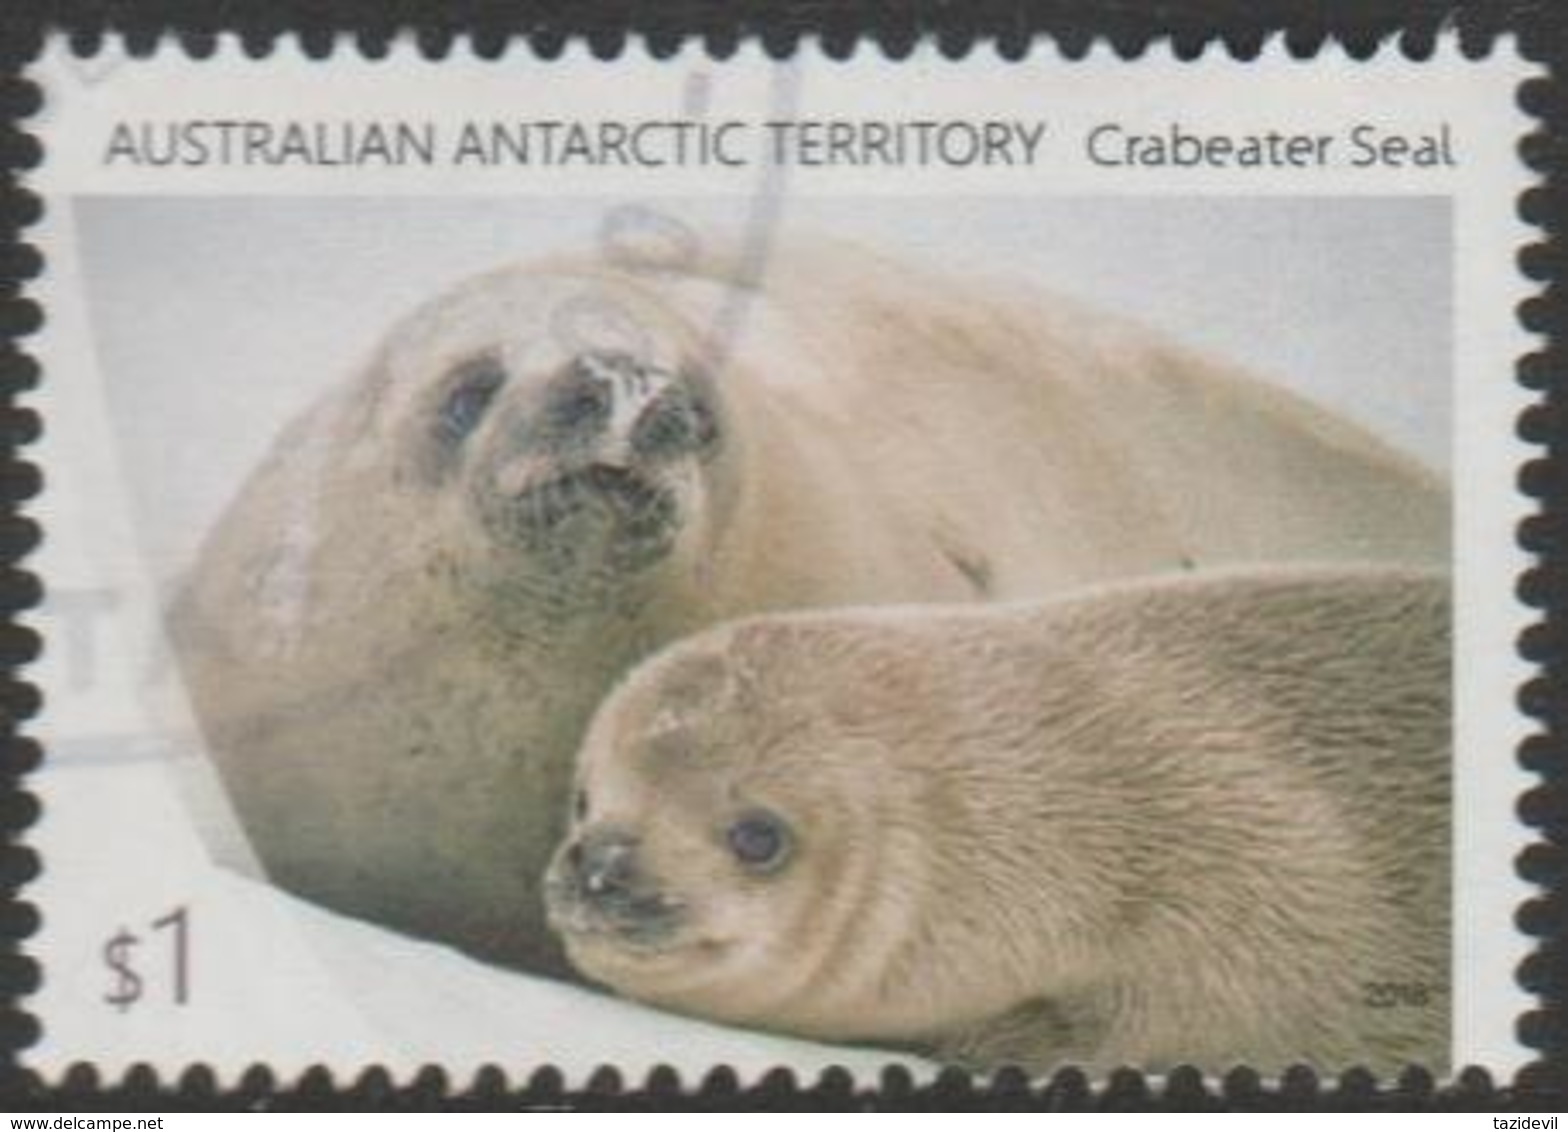 AUSTRALIAN ANTARCTIC TERRITORY - USED 2018 $1.00 Crab Eater Seals - Seal And Pup - Used Stamps